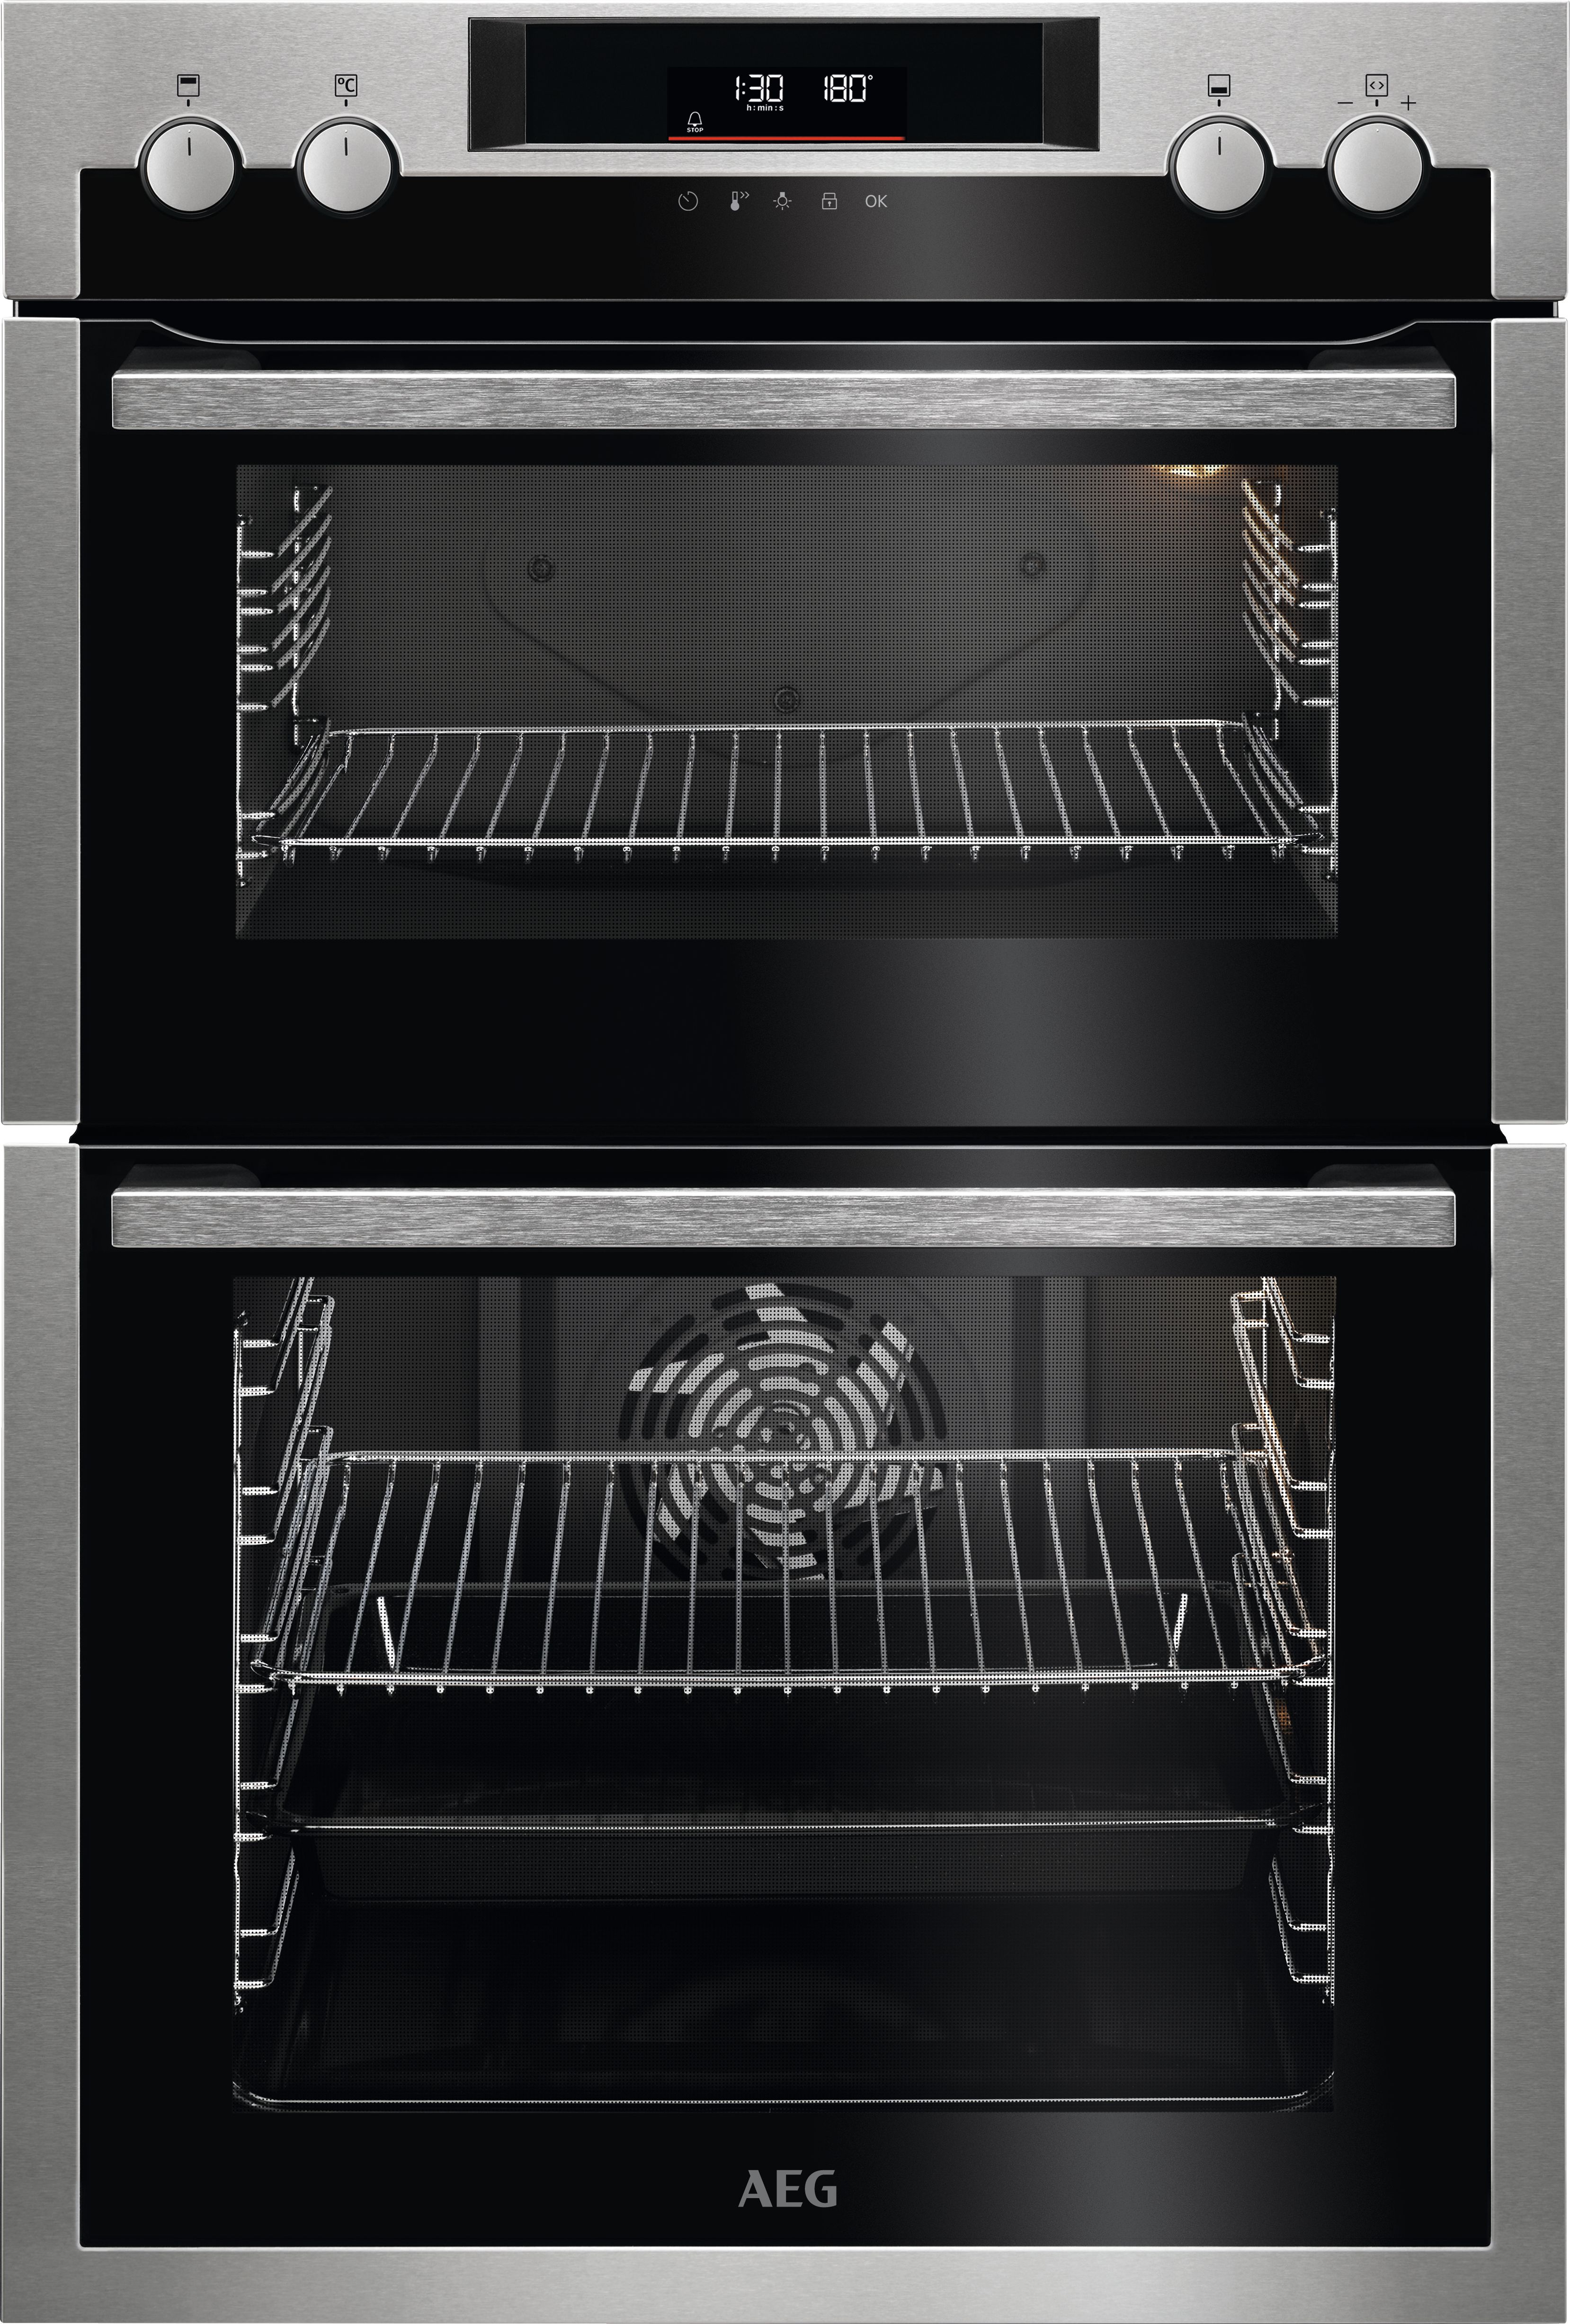 AEG 6000 SurroundCook DCS531160M Built In Electric Double Oven - Black / Stainless Steel - A Rated, Black